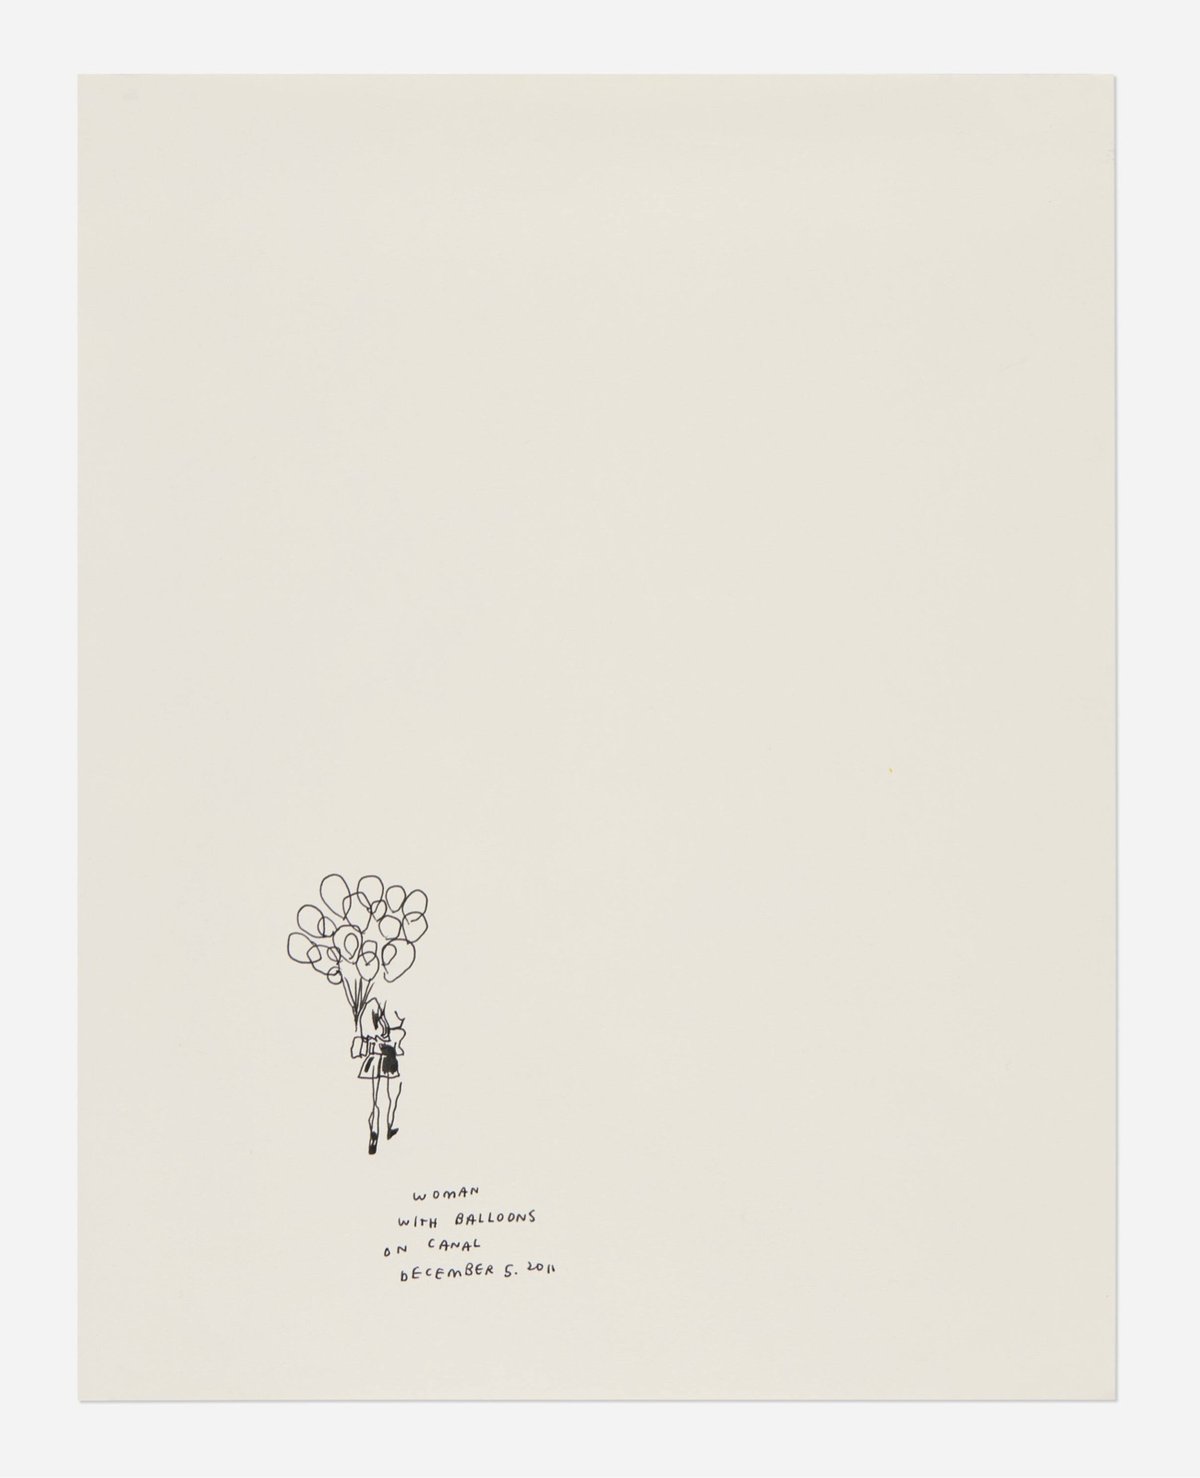 drawing of a woman holding balloons